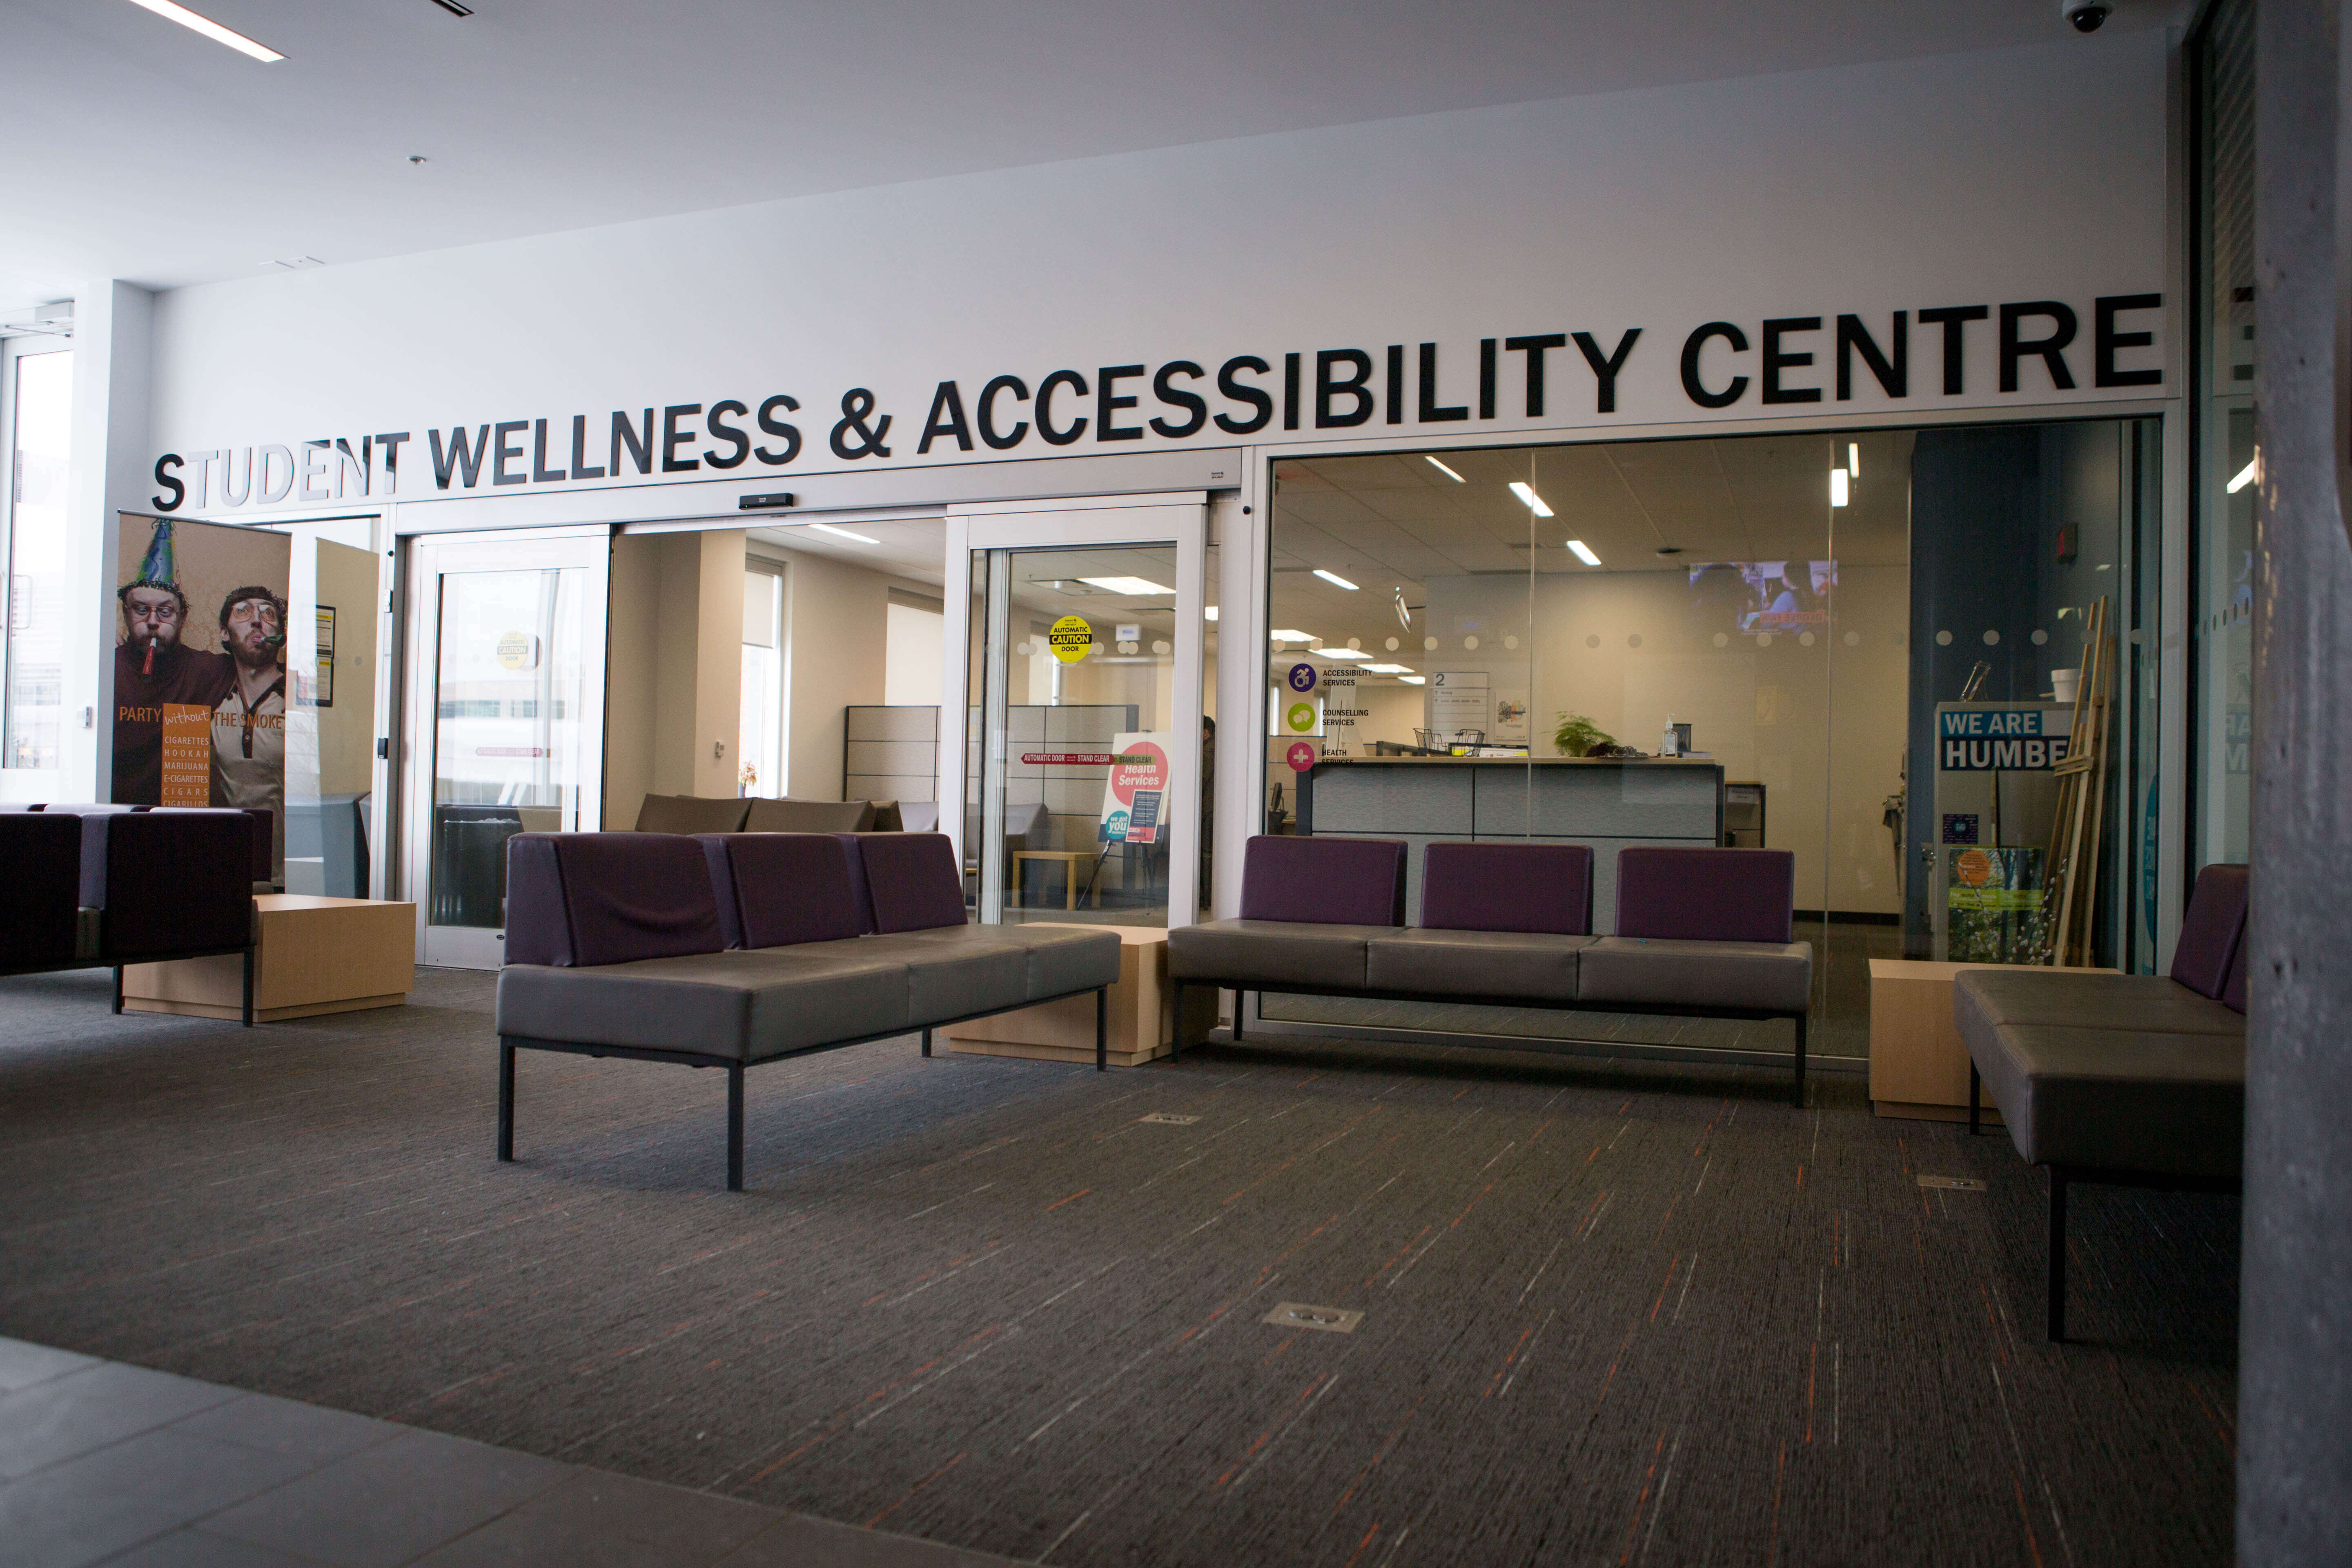 Entrance area to the Humber Student Wellness & Accessibility Centre.